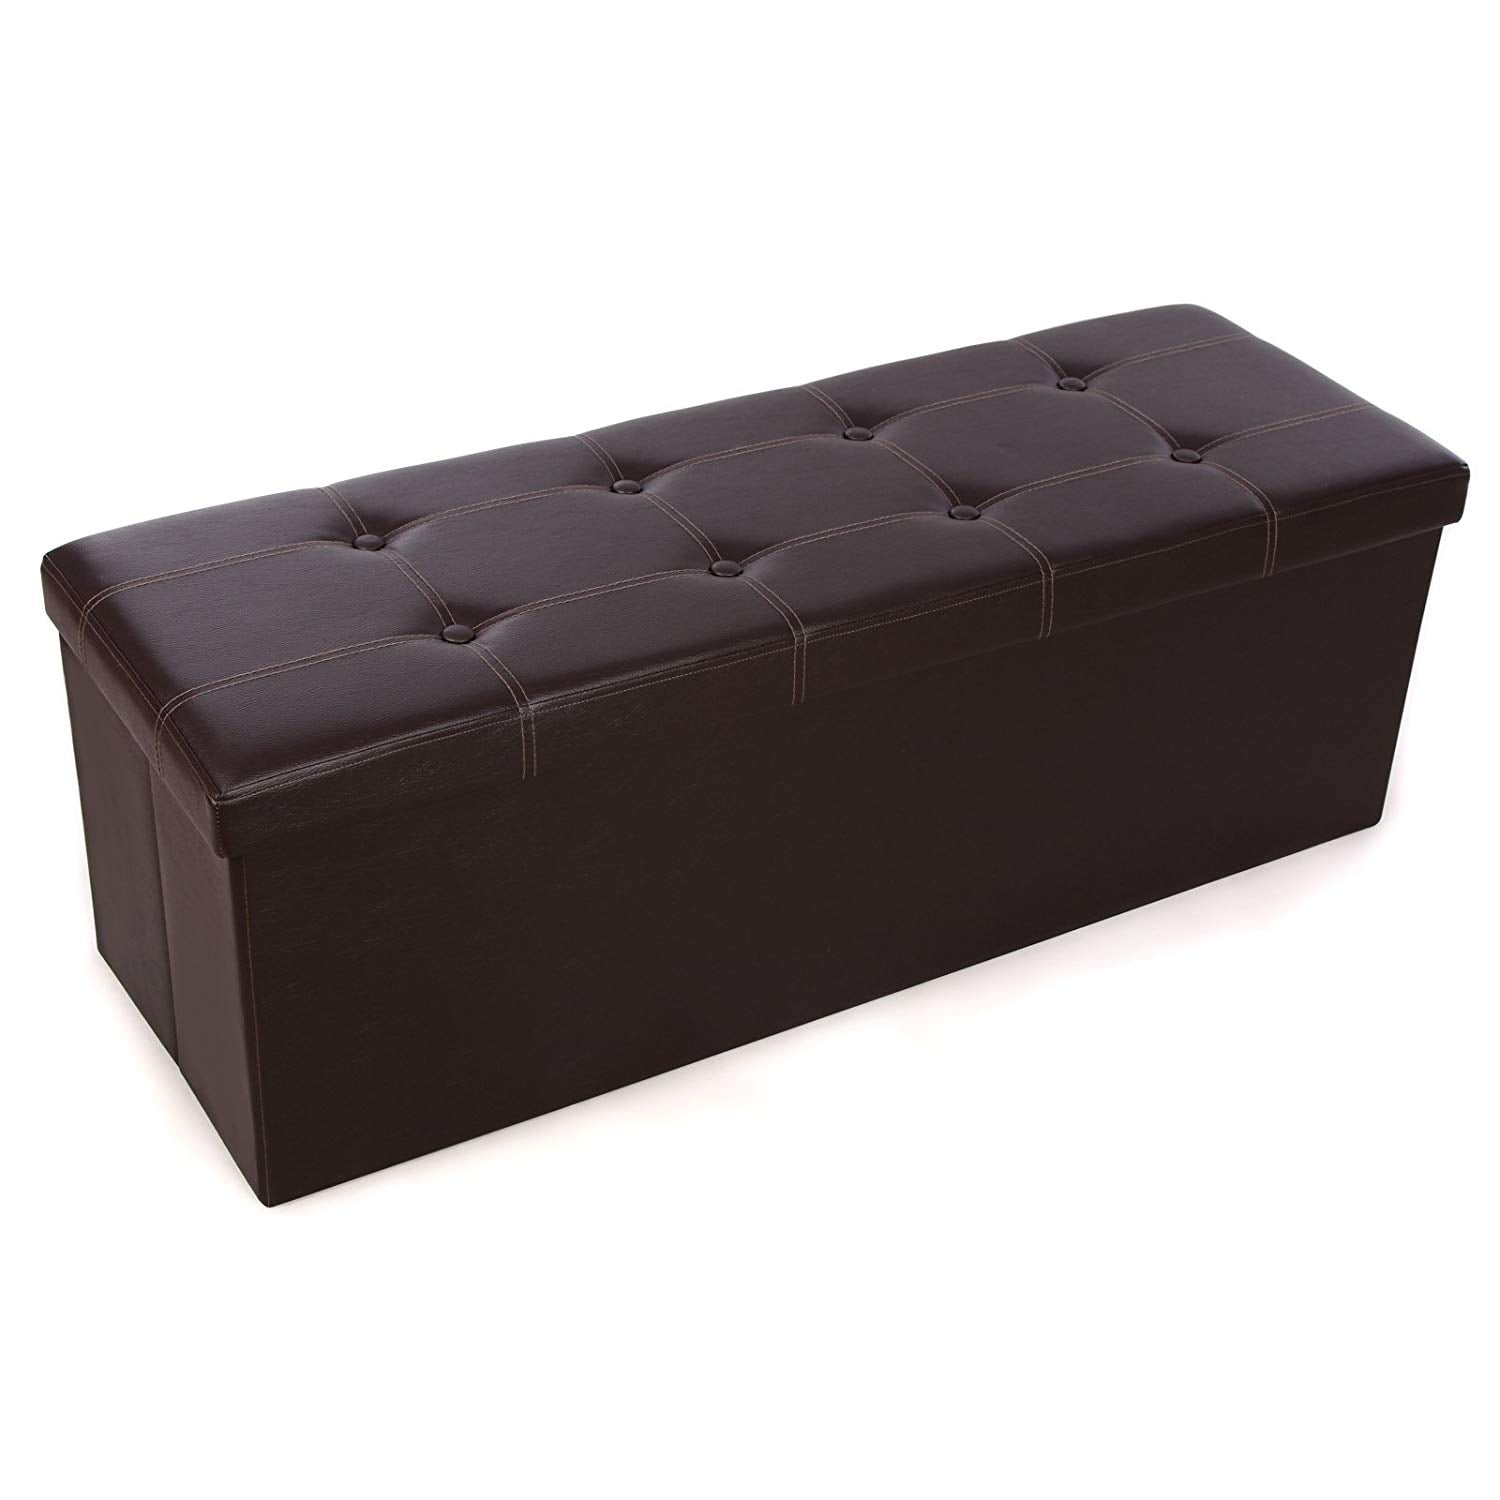 New Quilted Top Folding Storage Ottoman Seat Stool Toy Storage Box Faux Leather 